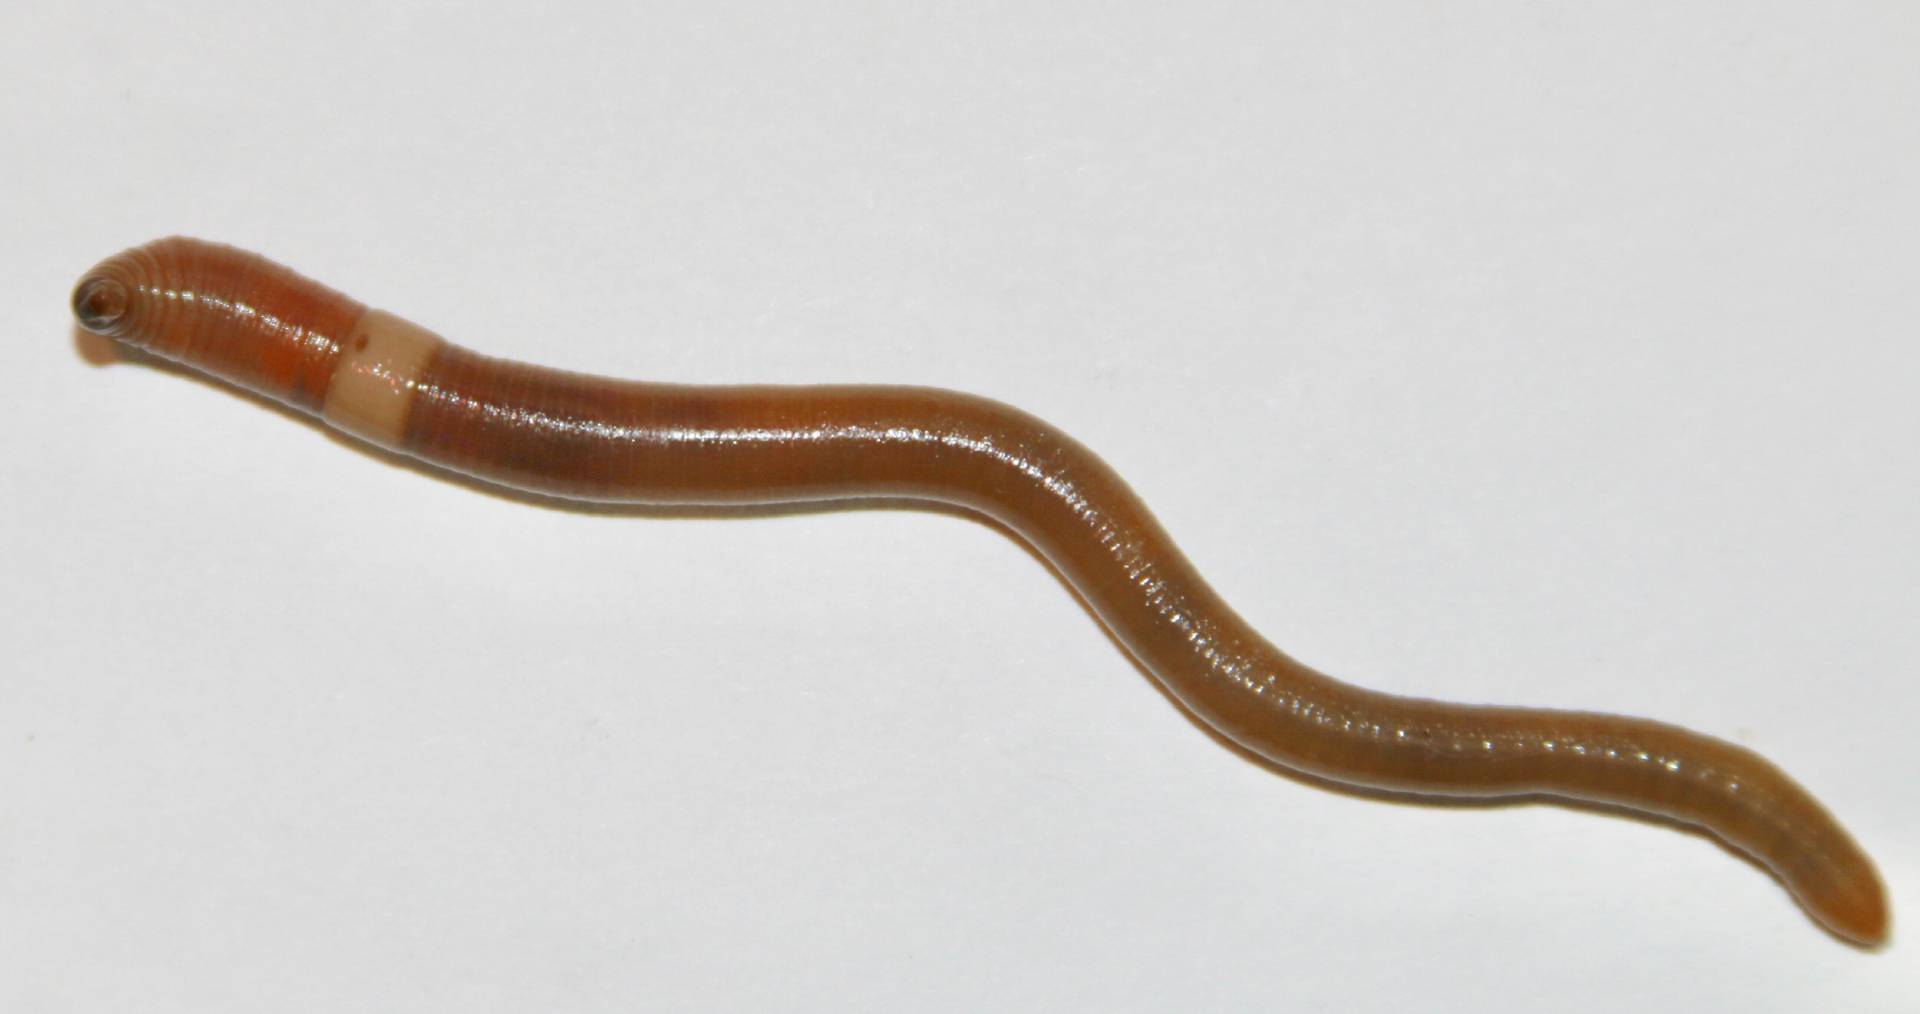 An invasive jumping worm is spread out on a white background.